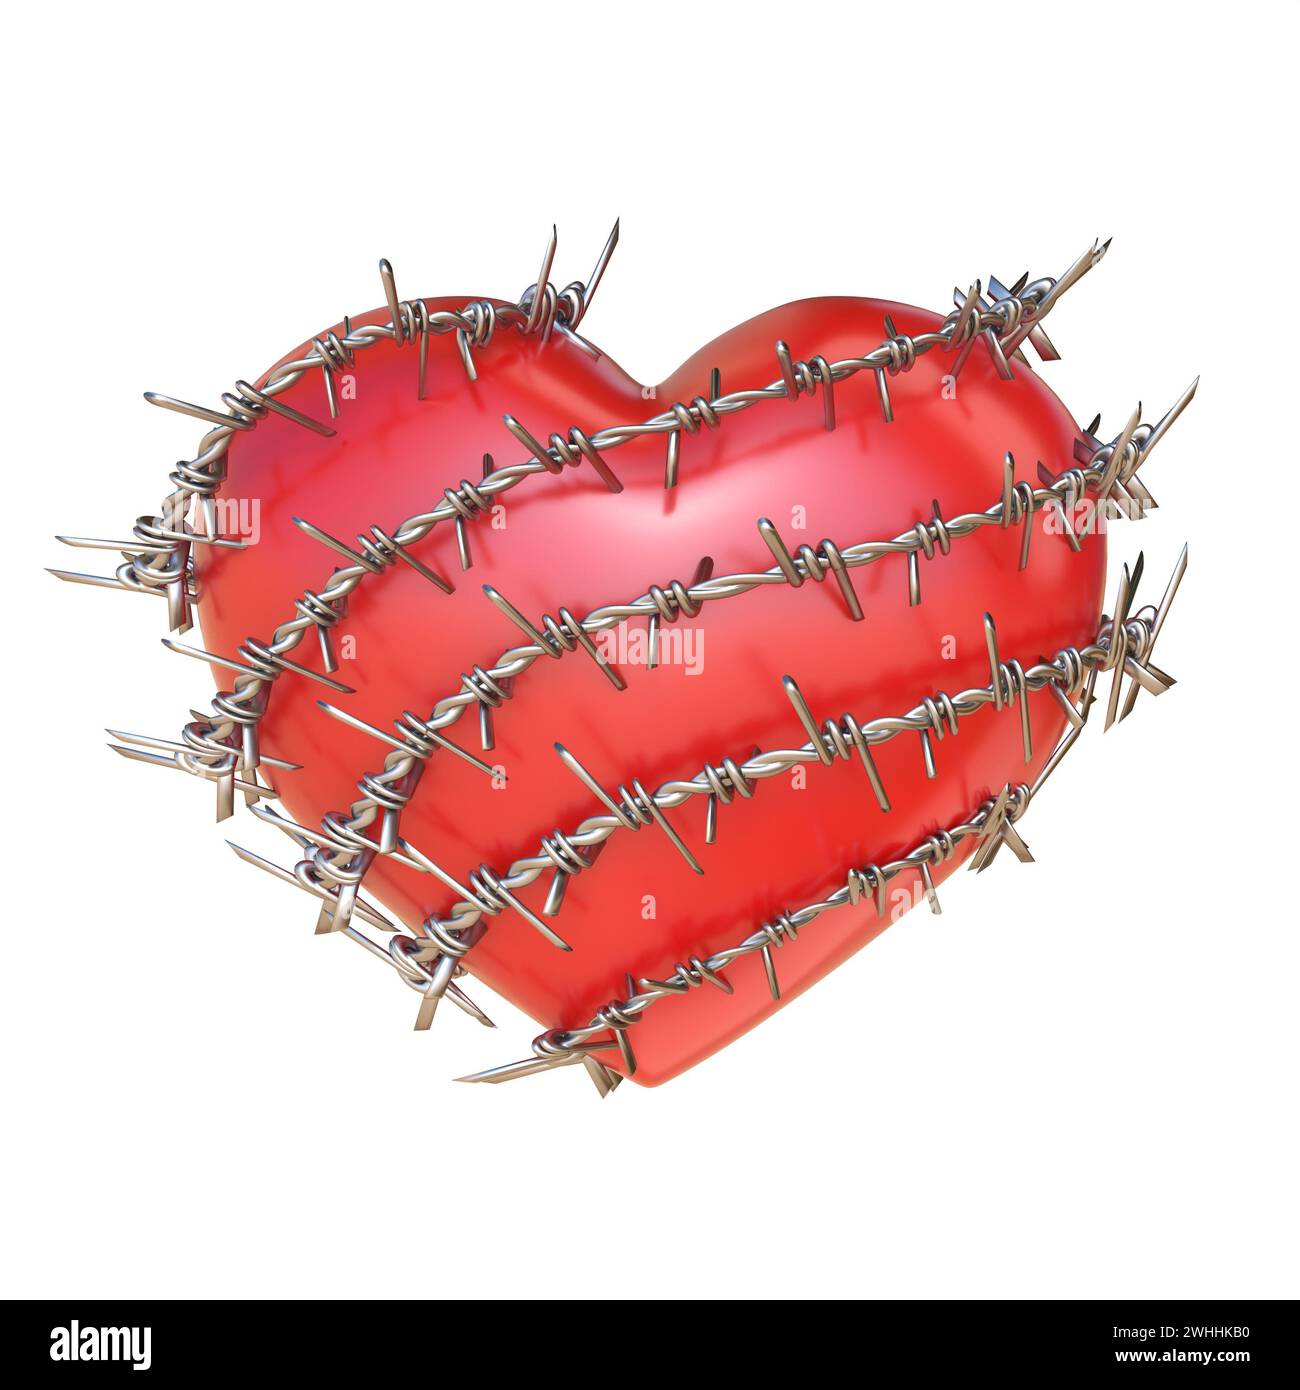 Heart surrounded by barbed wire 3D Stock Photo